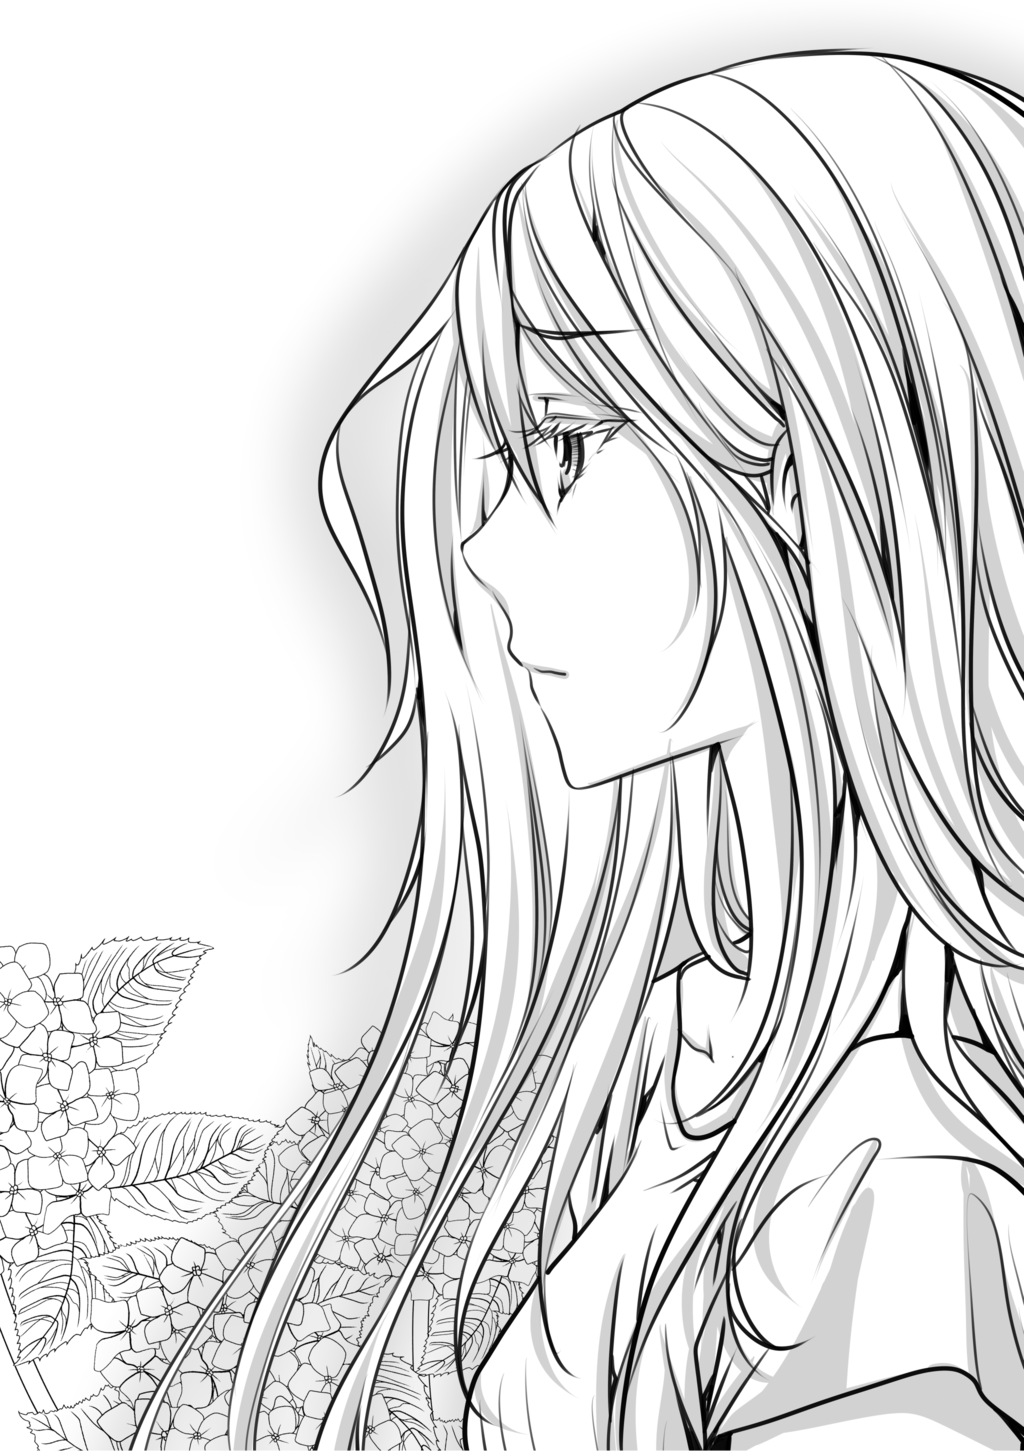   Lily Love Chapter 28 - RAWS are here :D (log in via FB to see or create account